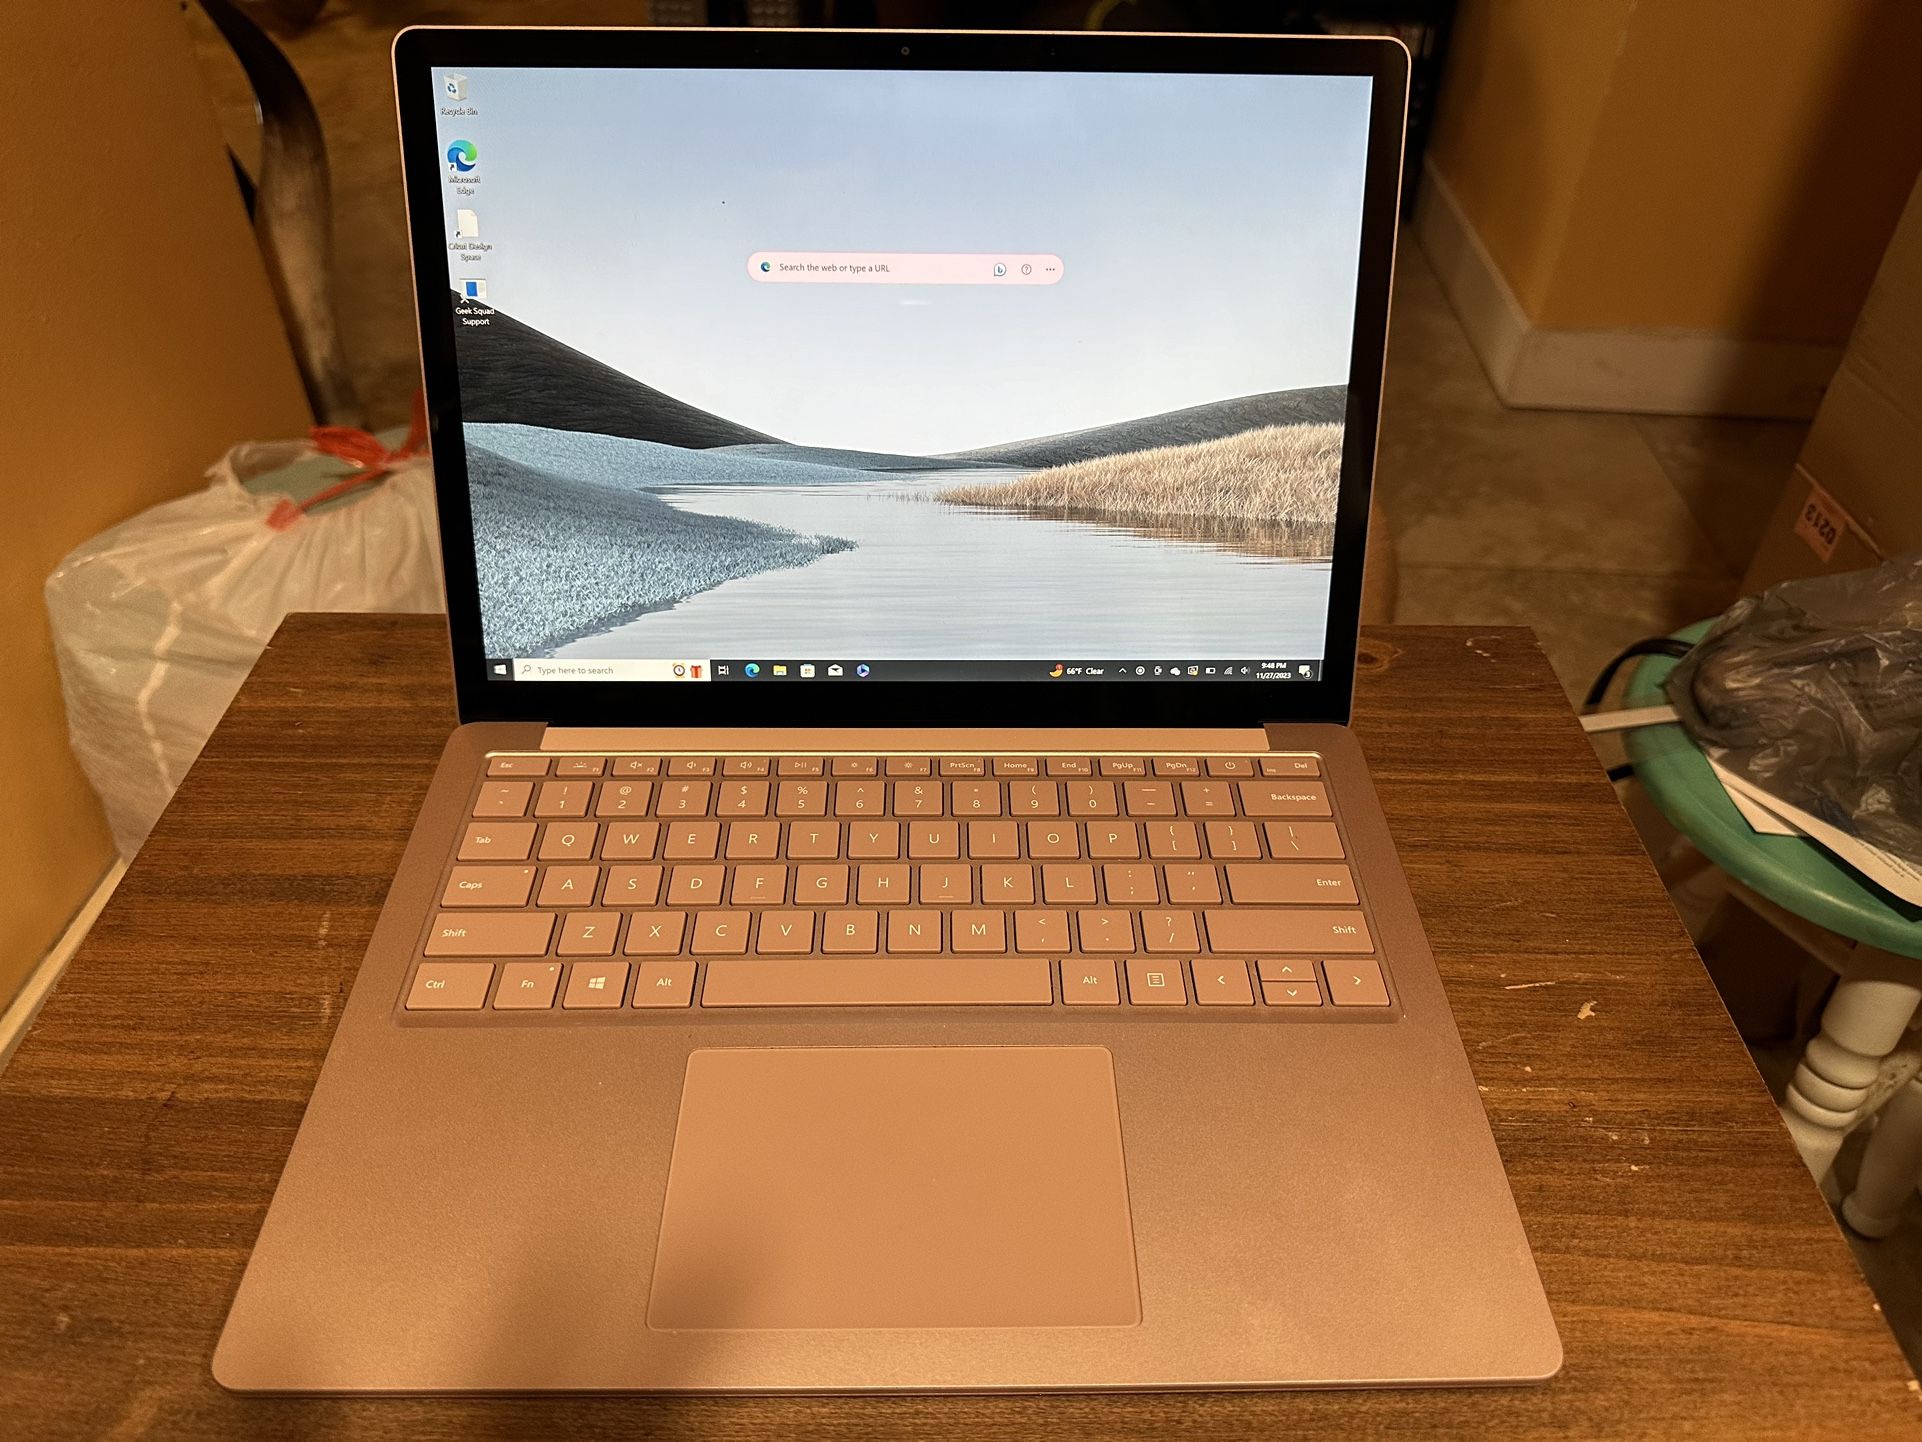 microsoft surface laptop 3 13.5" touch screen